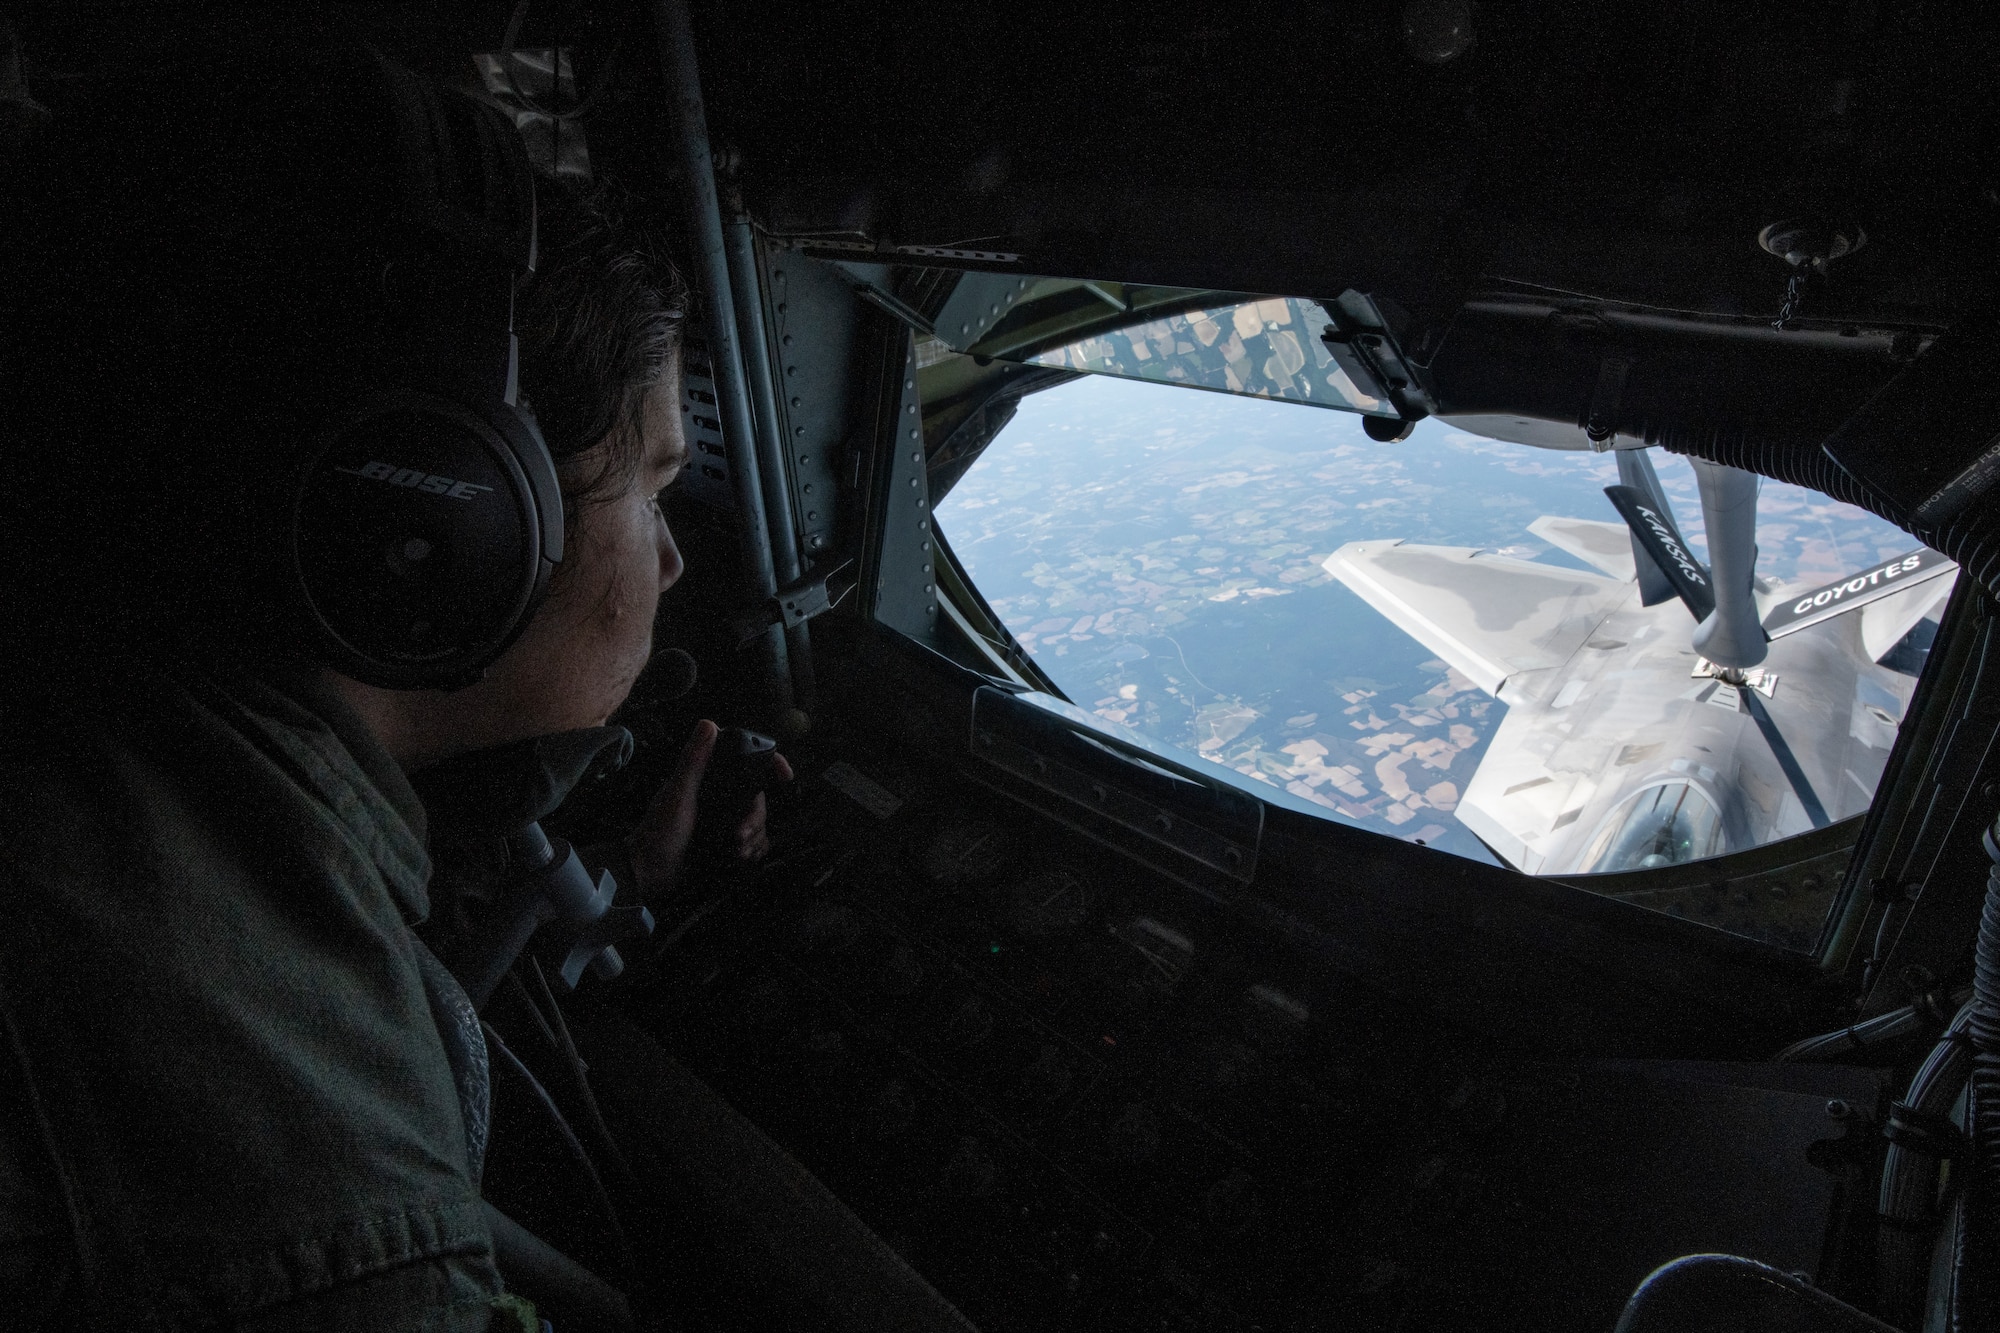 U.S. Air Force Staff Sgt. Kelsey Warren, a KC-135 Stratotanker boom operator with the 190th Air Refueling Wing, Kansas Air National Guard, refuels an F-22 Raptor with the 325th Fighter Wing, during Sentry Savannah May 11, 2022,  in a military operations area over Florida. Three air refueling units from across the Air National Guard provided in-flight refueling in support of Sentry Savannah 2022, the ANG’s premier counter air exercise which encompasses 10 units of fourth and fifth generation fighter aircraft, tests the capabilities of our warfighters in a simulated near-peer environment and trains the next generation of fighter pilots for tomorrow’s fight. (U.S. Air National Guard photo by Staff Sgt. Hanna Smith)